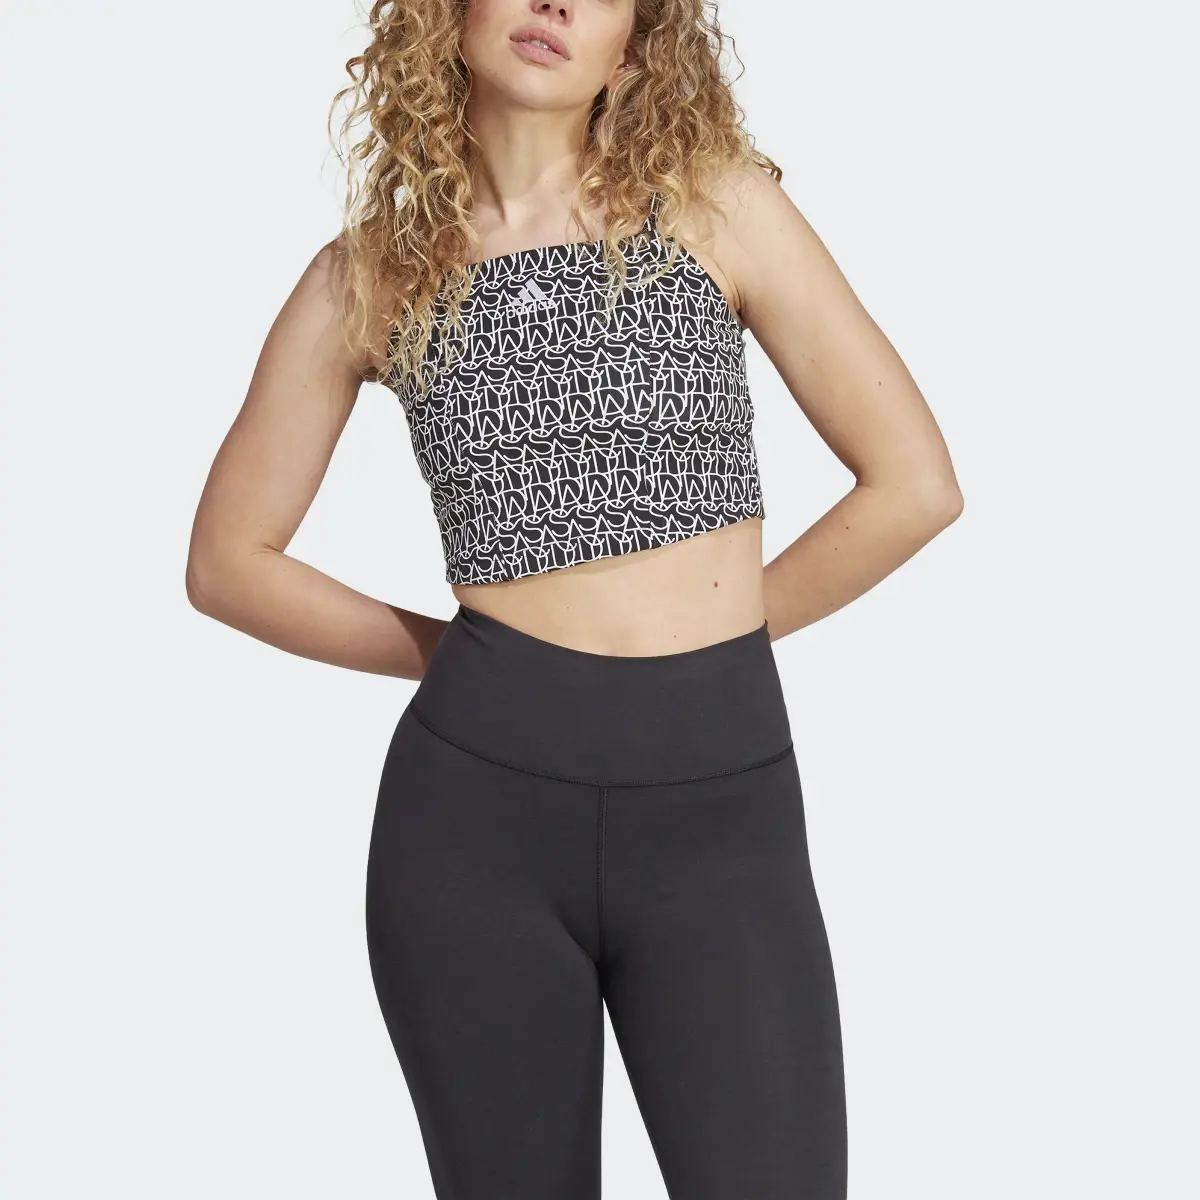 Adidas Allover adidas Graphic Corset-Inspired Atlet. 1